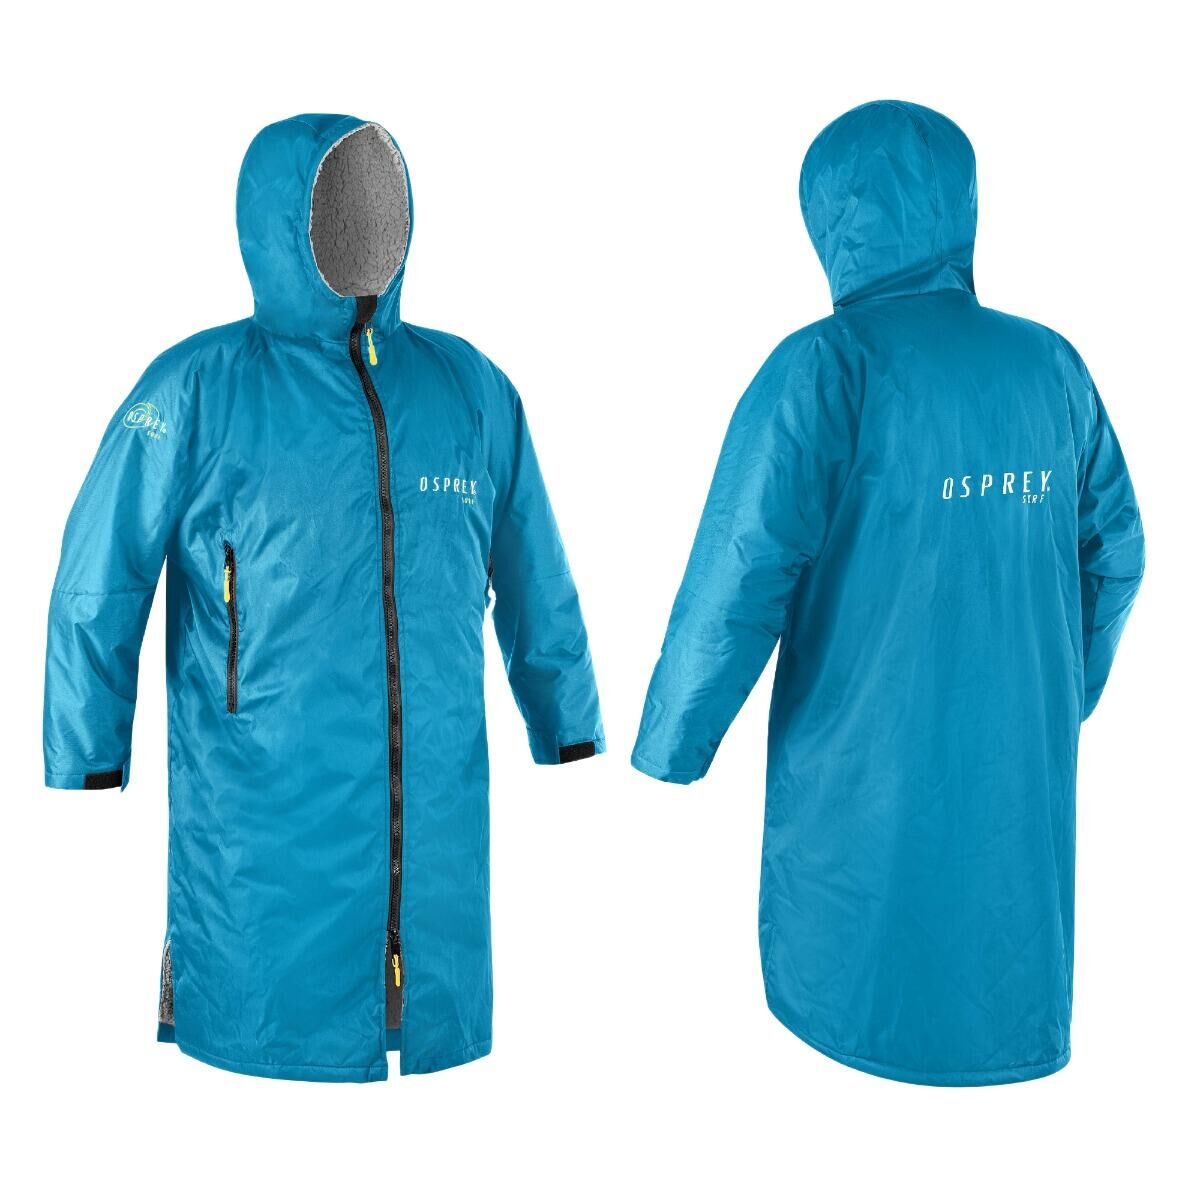 OSPREY ACTION SPORTS Osprey Adult Changing Robe, Waterproof Changing Robe Teal